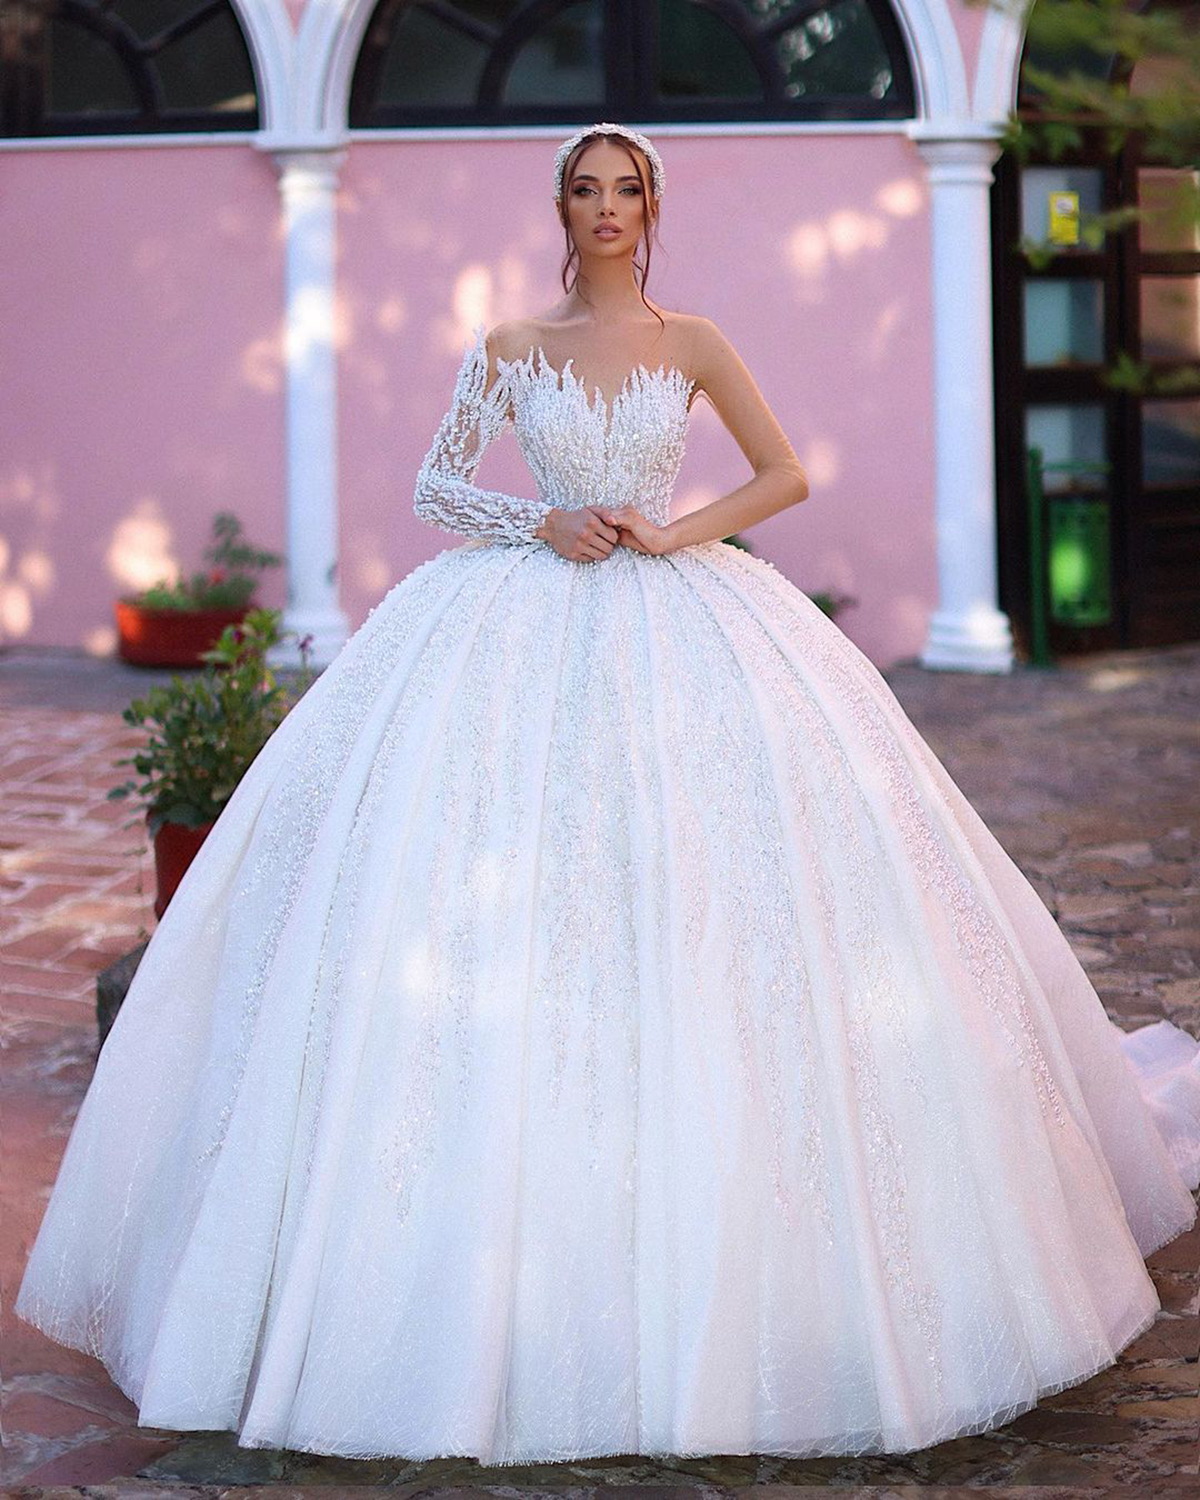 Exquisite One Shoulder Women Wedding Dress Shiny Custom Made Beads Lace Ball Gown Floor Length Bridal Dresses Plus Size